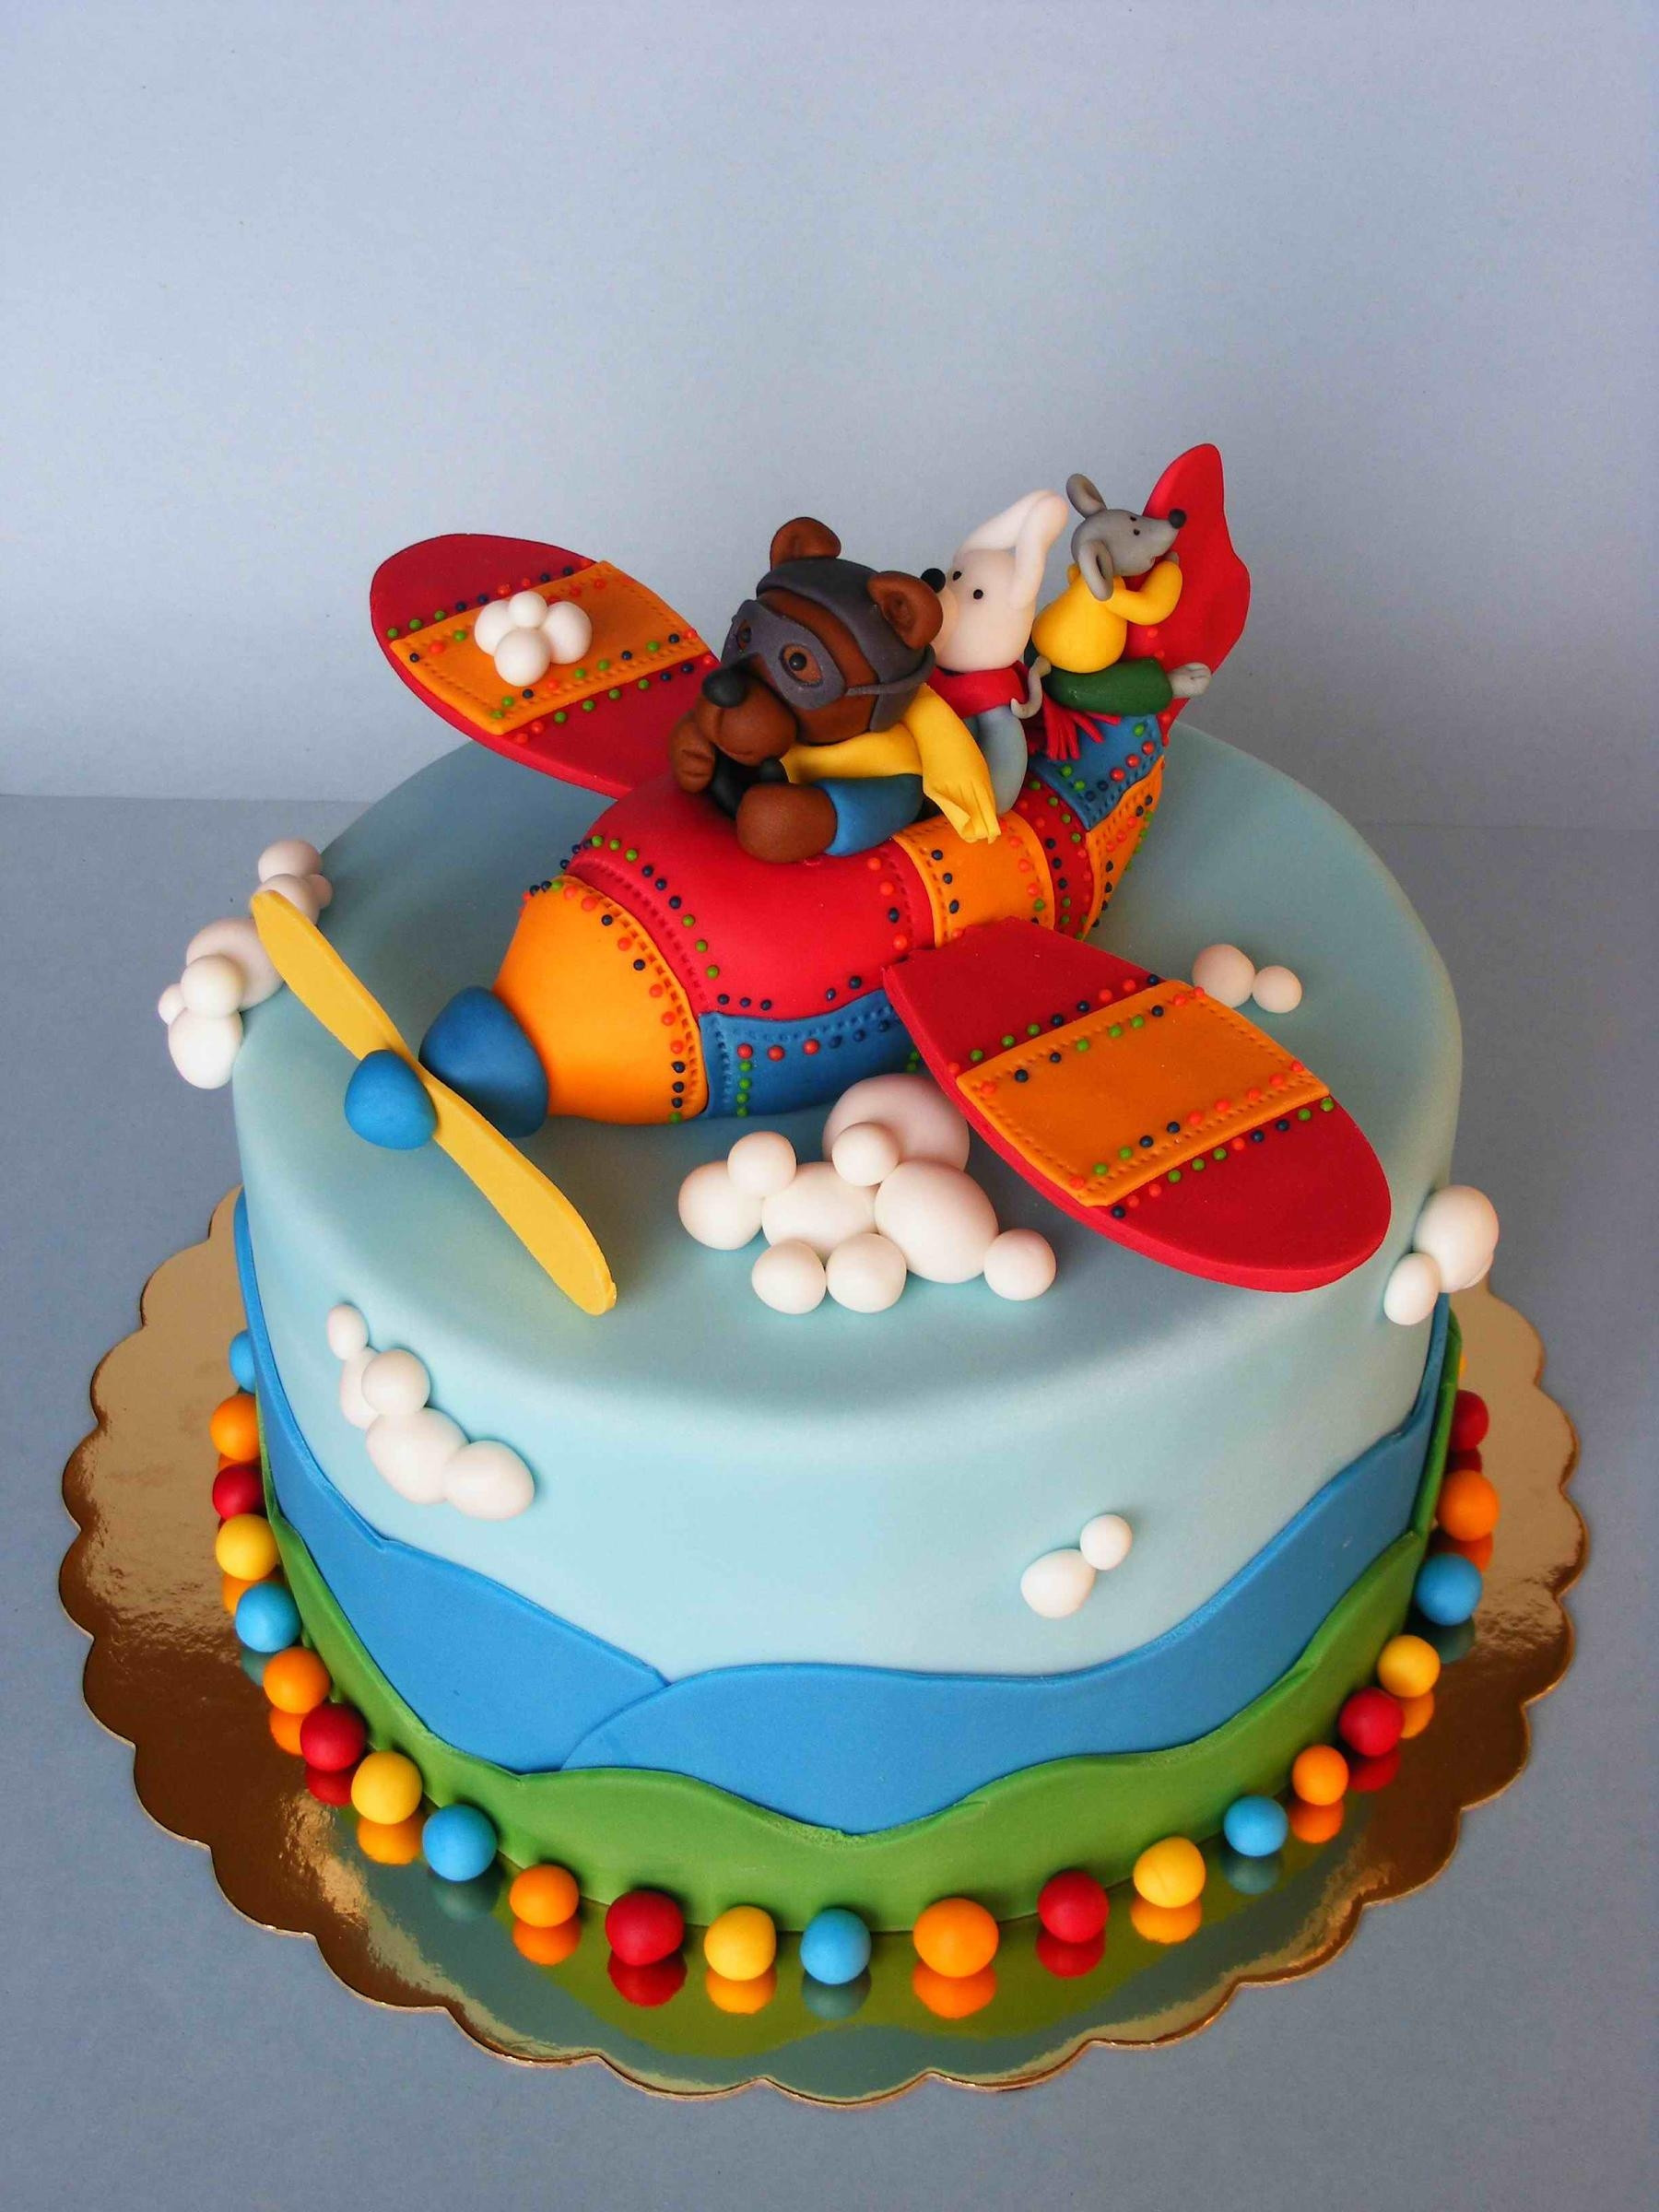 Birthday Cake Images for Kids Best Of Children S Birthday Cakes Cakecentral